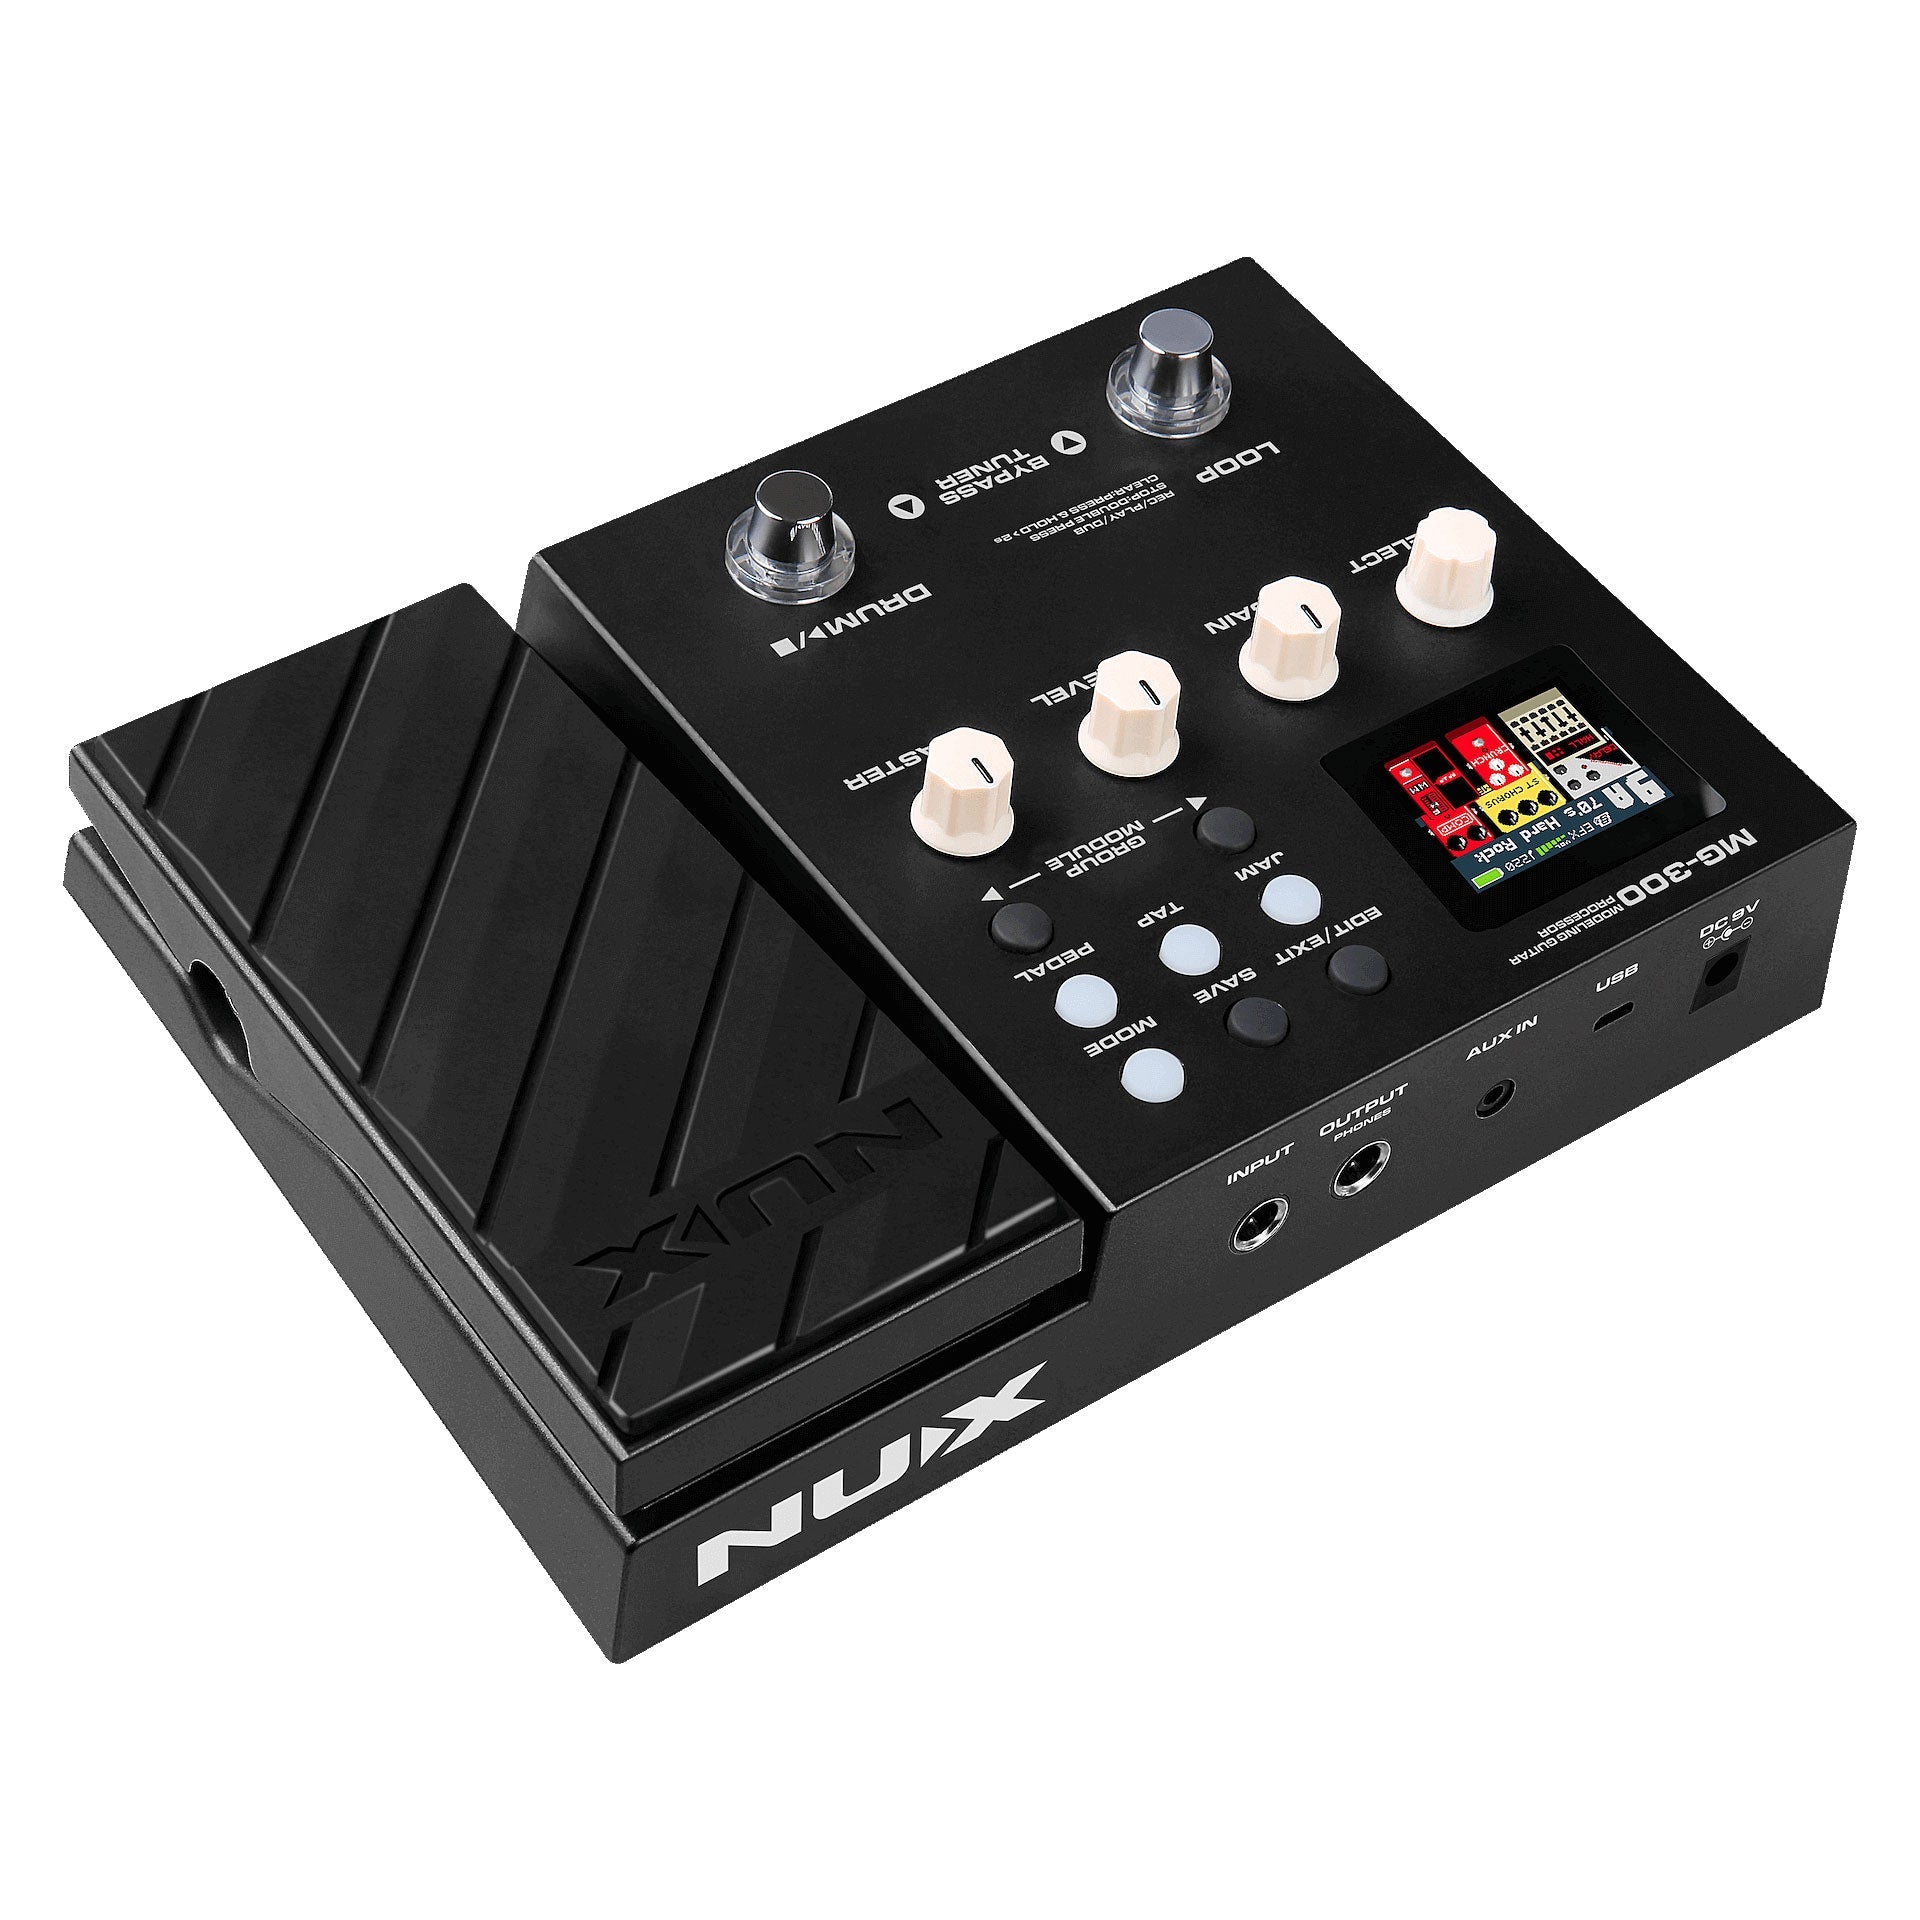 Pedal Guitar Nux MG-300 - Việt Music